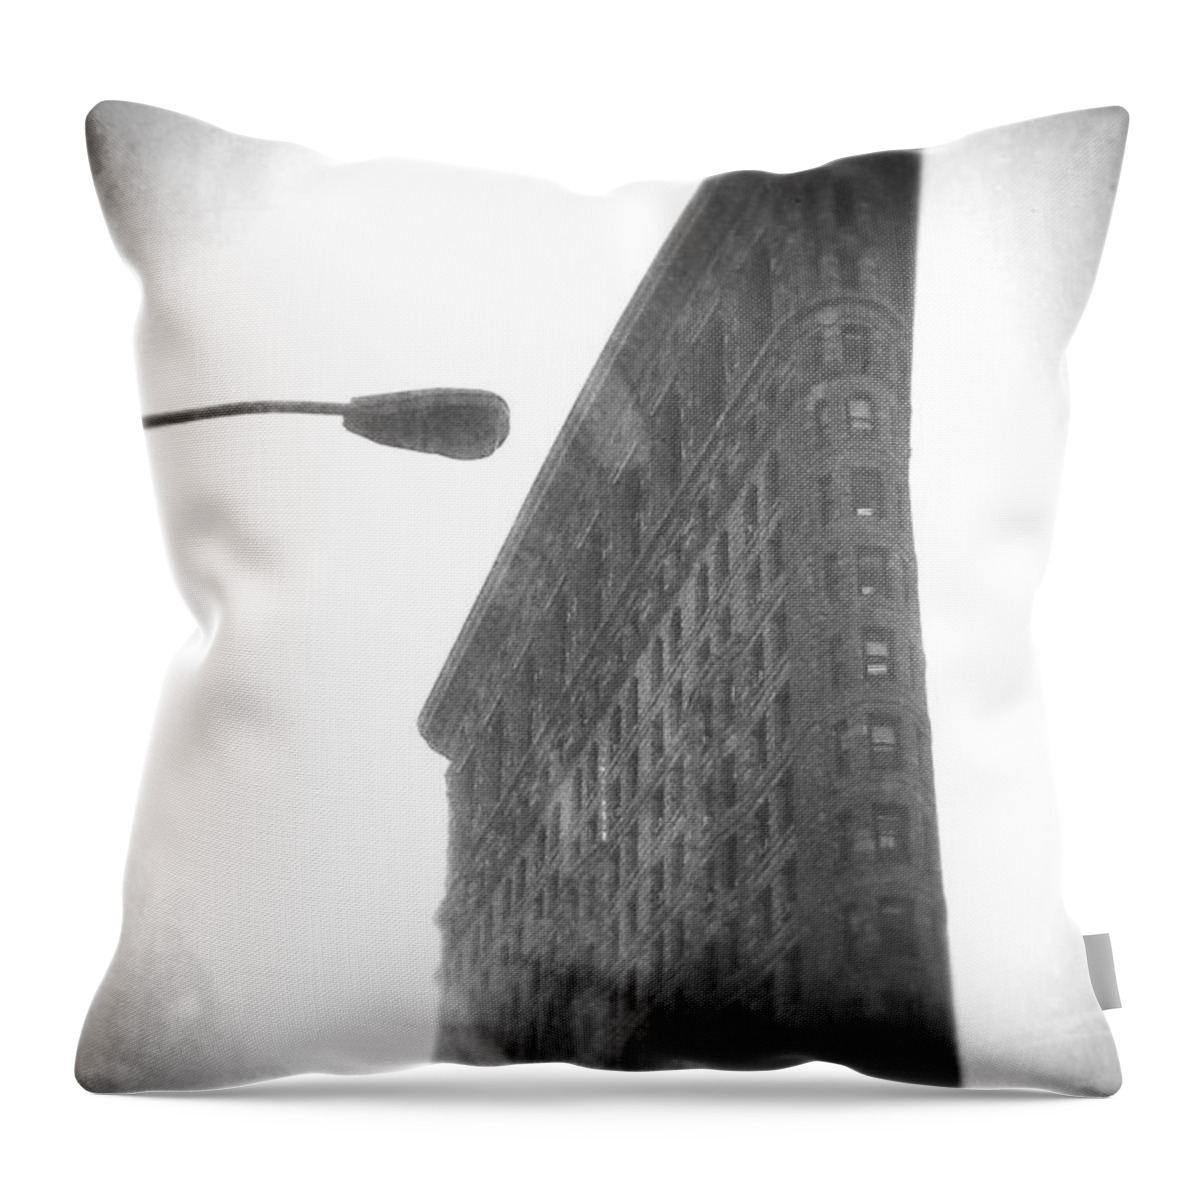 B&w Gallery Throw Pillow featuring the photograph The Old Neighbourhood by Steven Huszar